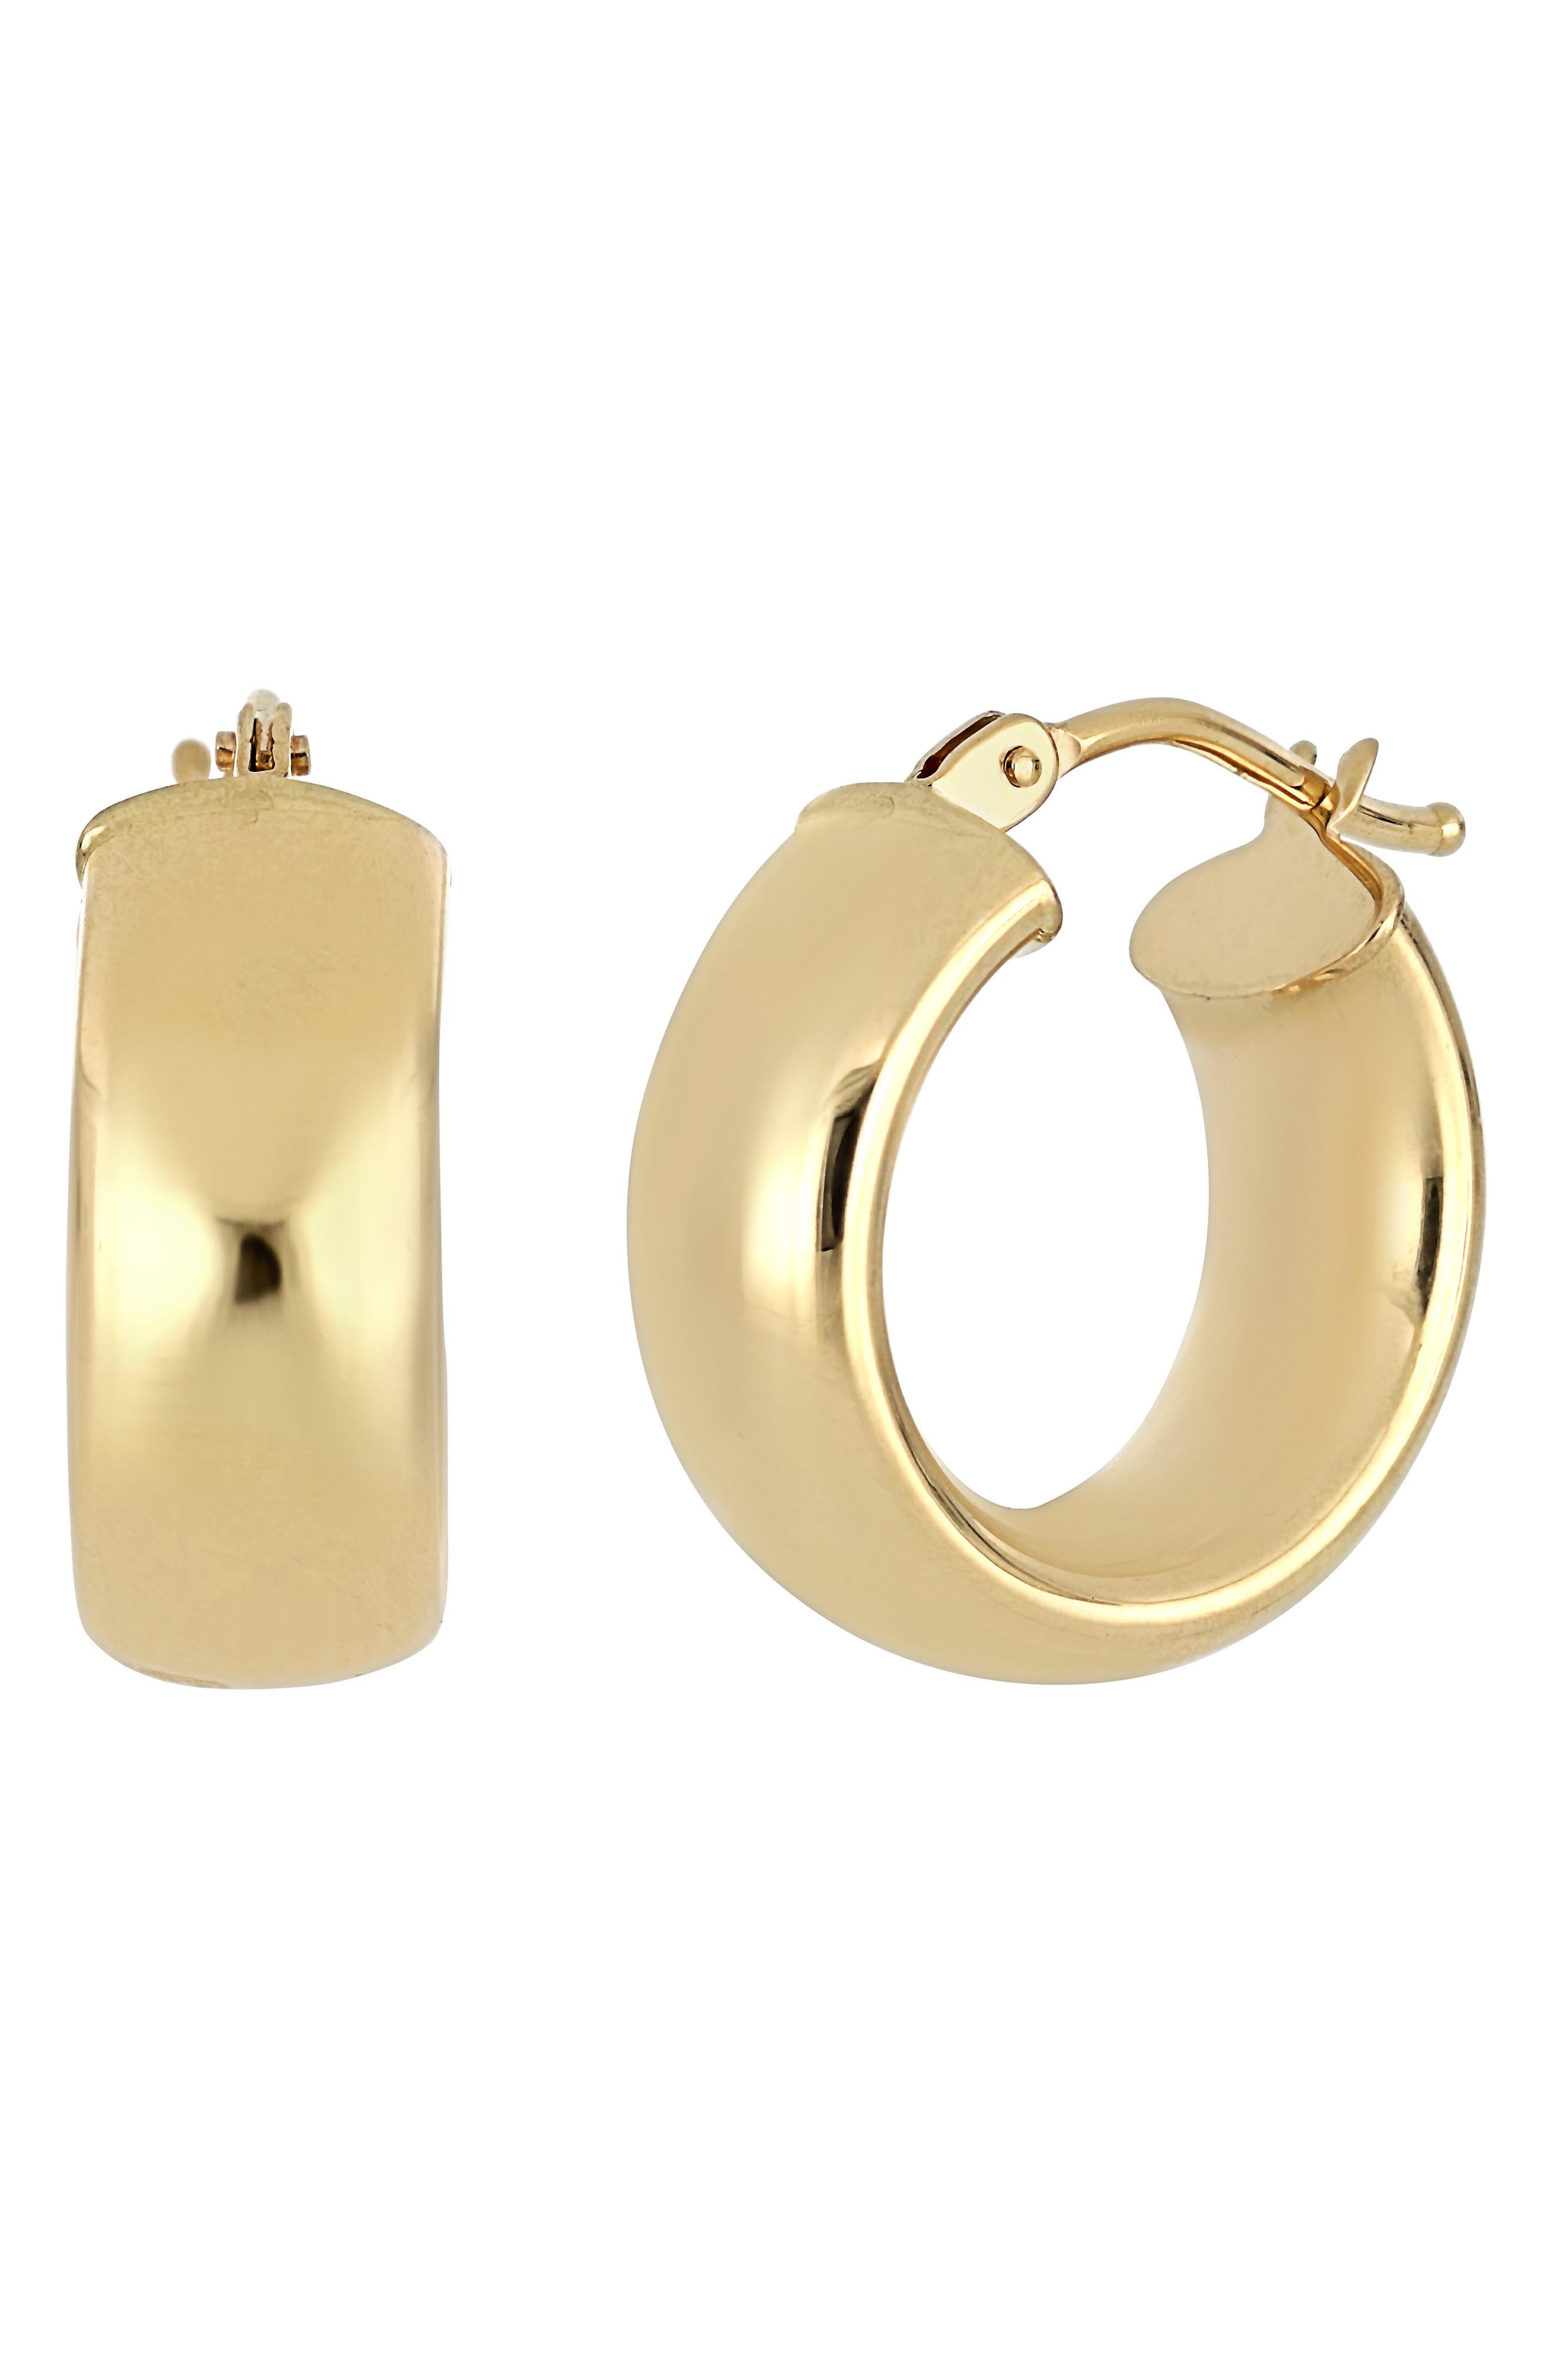 Stainless Steel Gold Hoops Oval Beaded Earrings Classic Gift for Her